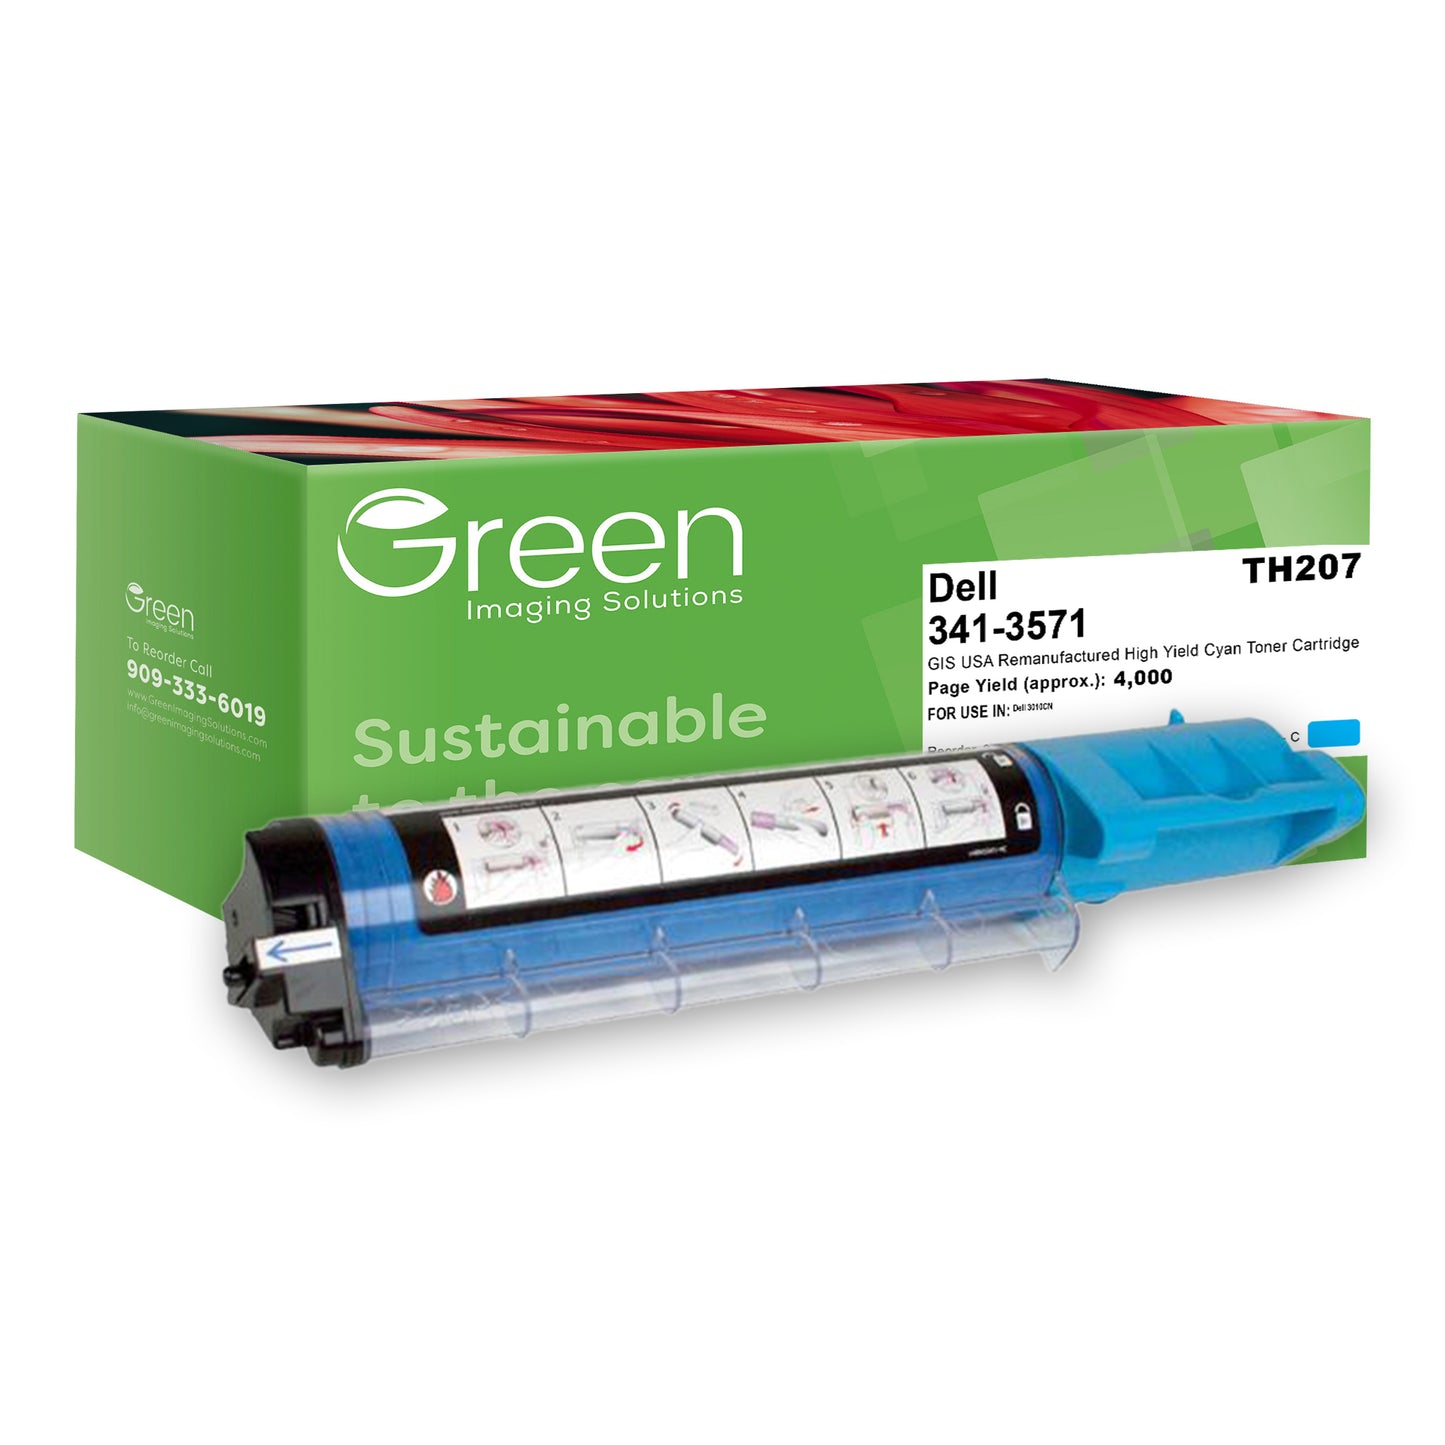 Green Imaging Solutions USA Remanufactured Non-OEM New High Yield Cyan Toner Cartridge for Dell 3010